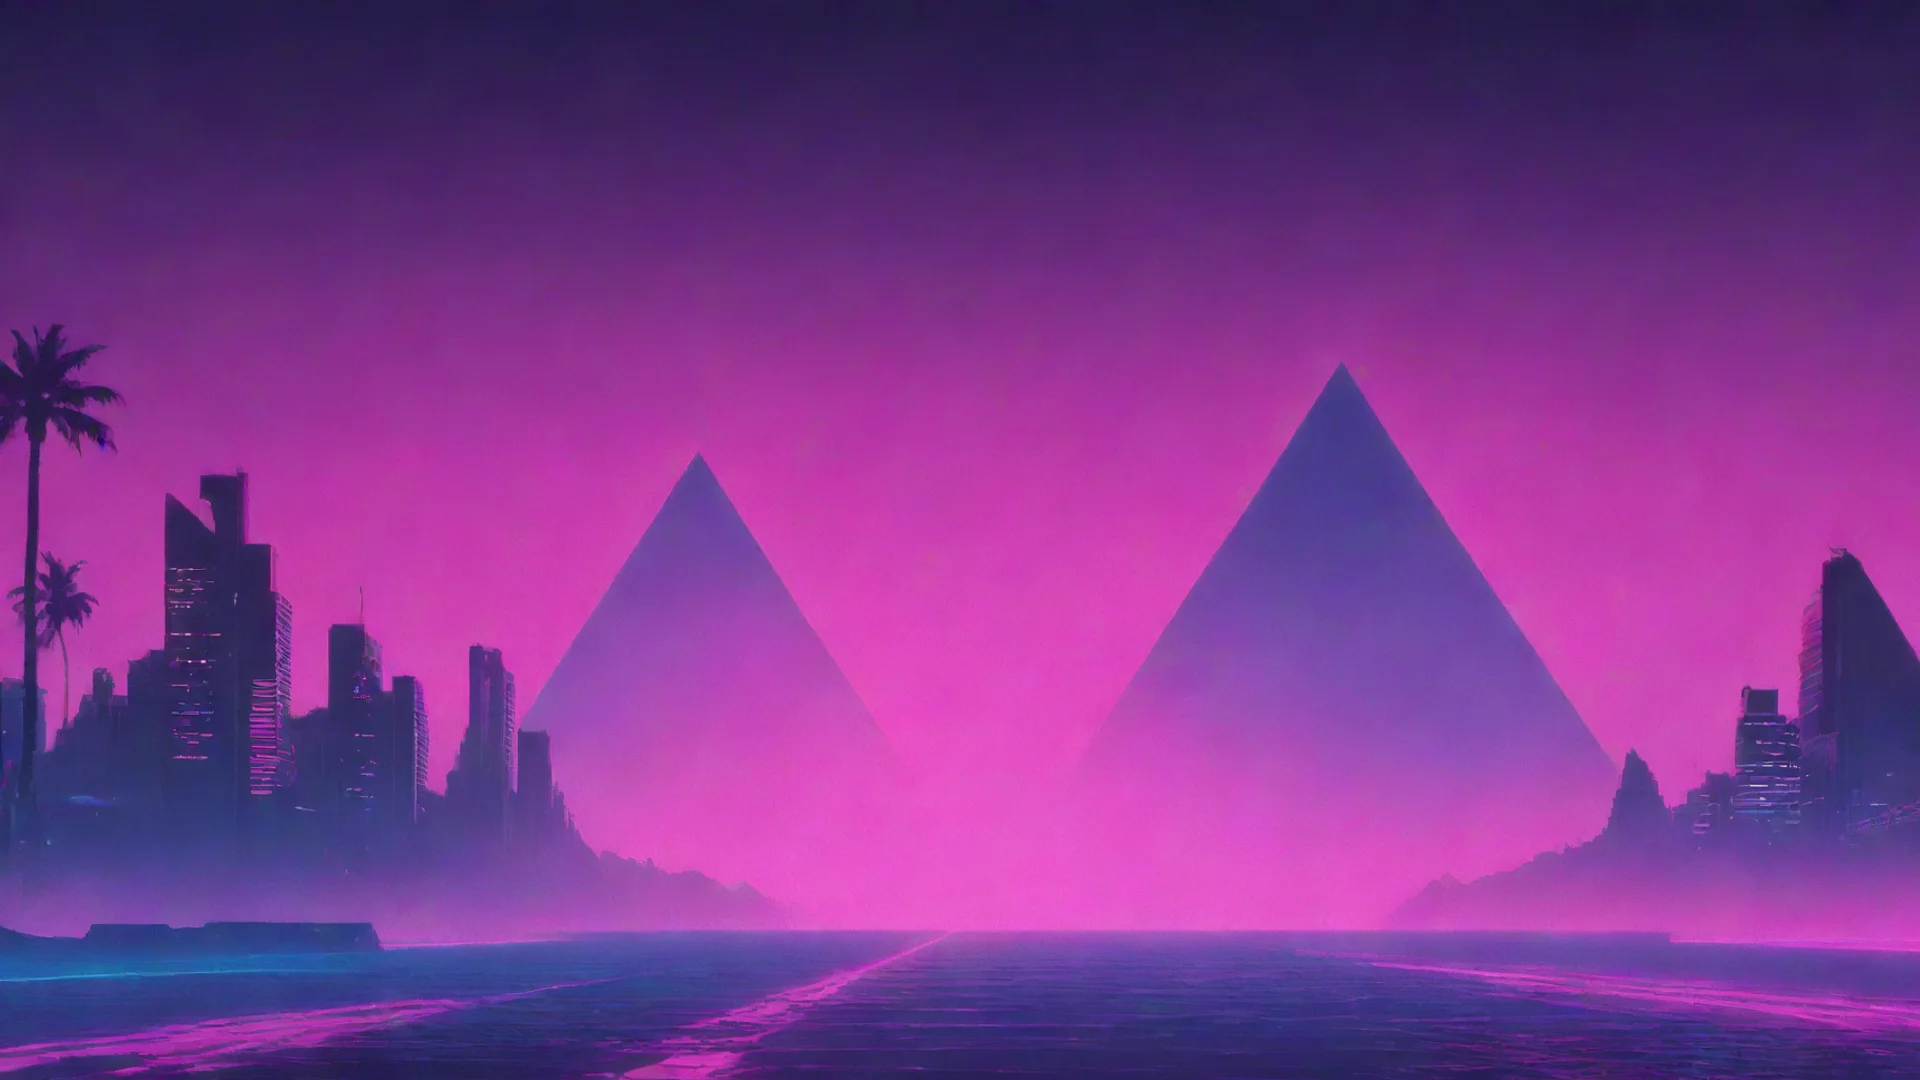 amazing synthwave awesome portrait 2 wide